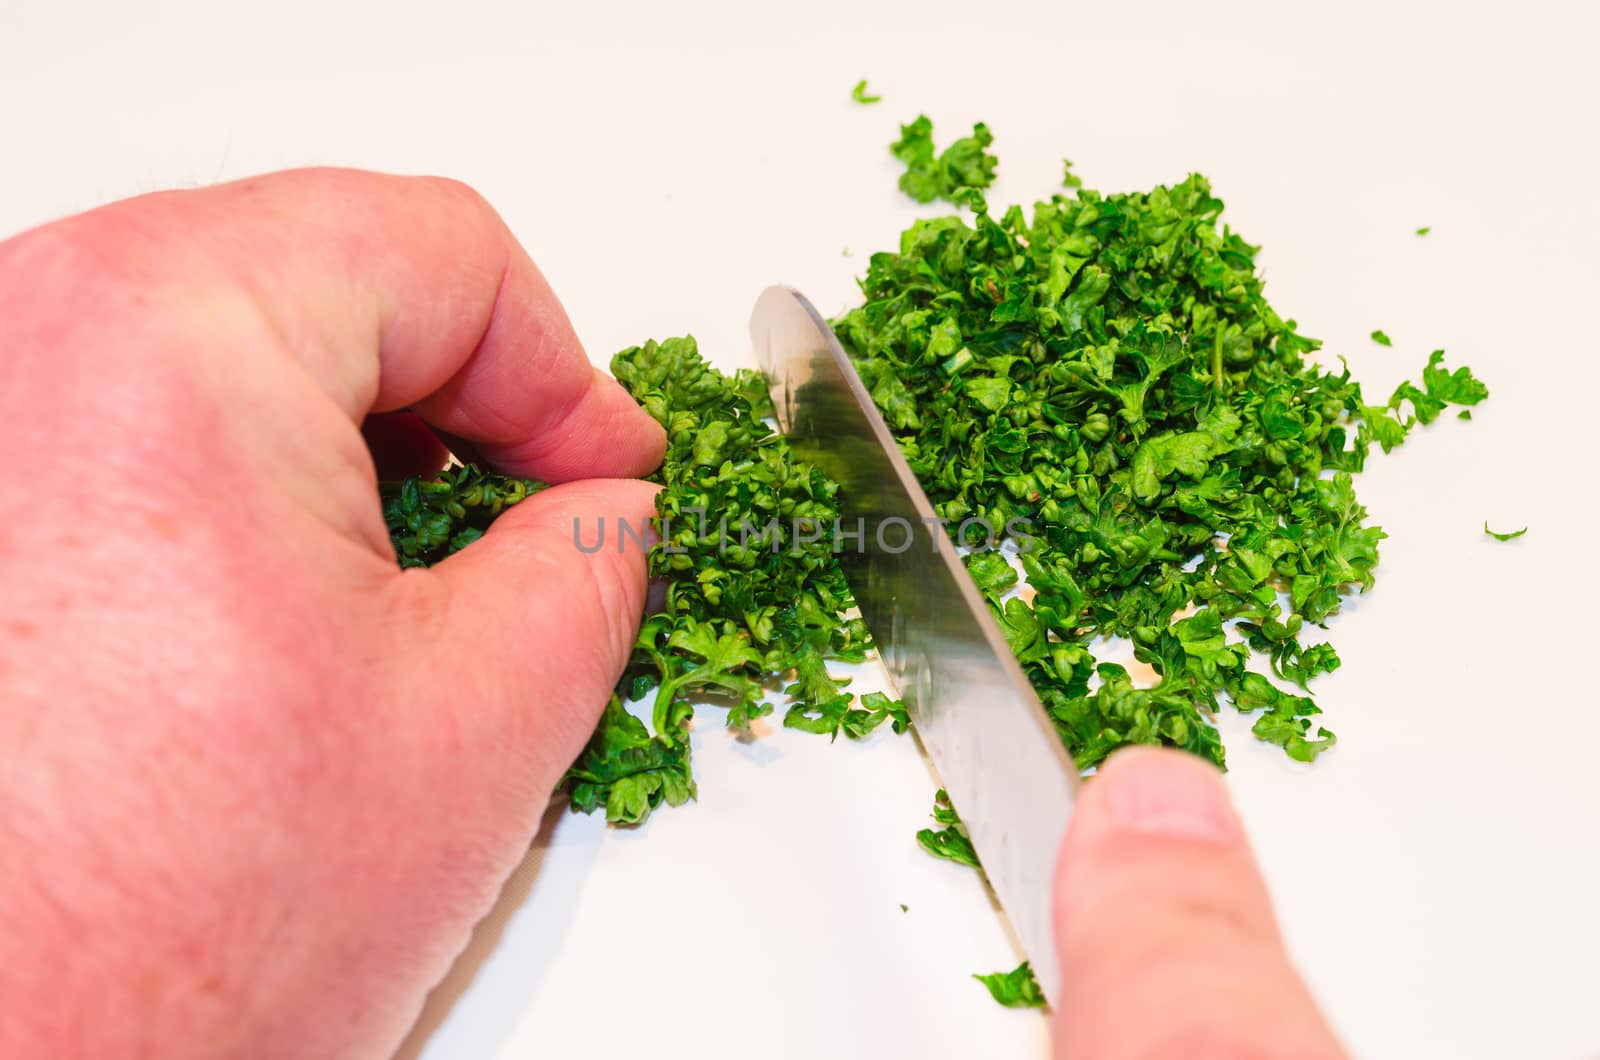 Chopping parsley with a knife on a cutting board.